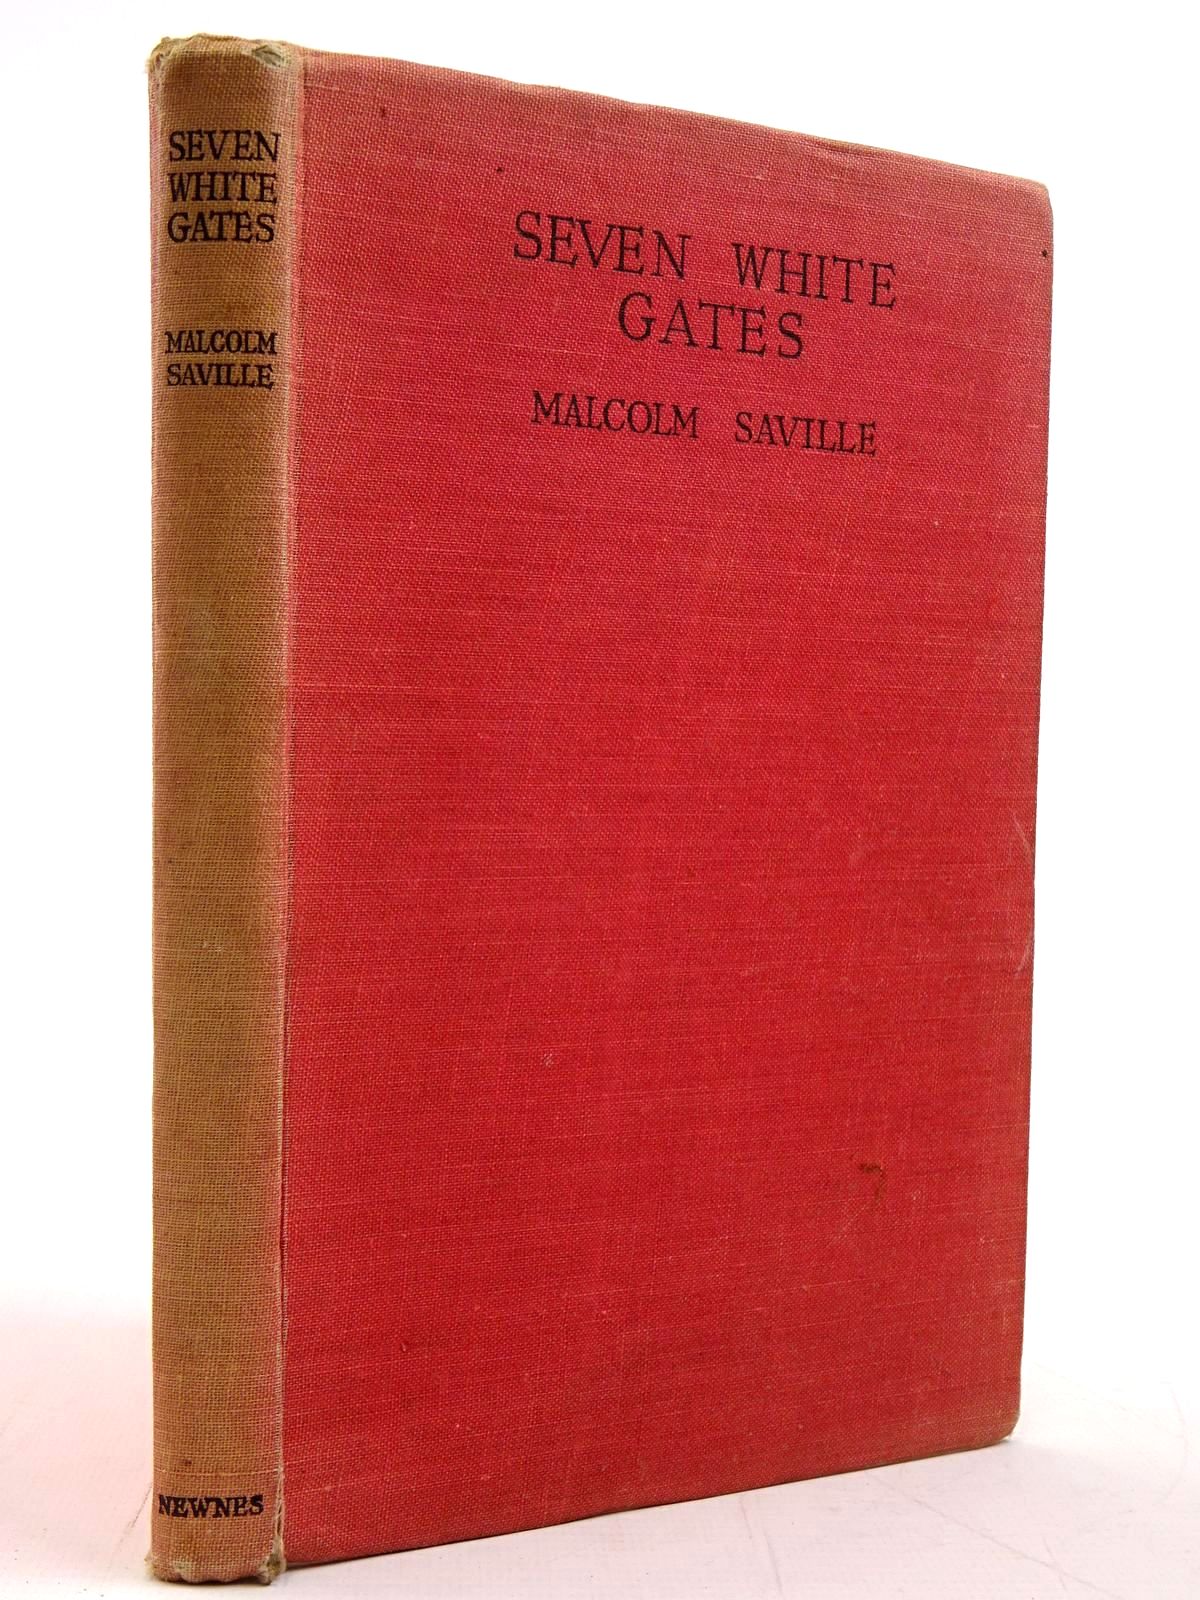 Photo of SEVEN WHITE GATES written by Saville, Malcolm illustrated by Prance, Bertram published by George Newnes Limited (STOCK CODE: 2130765)  for sale by Stella & Rose's Books